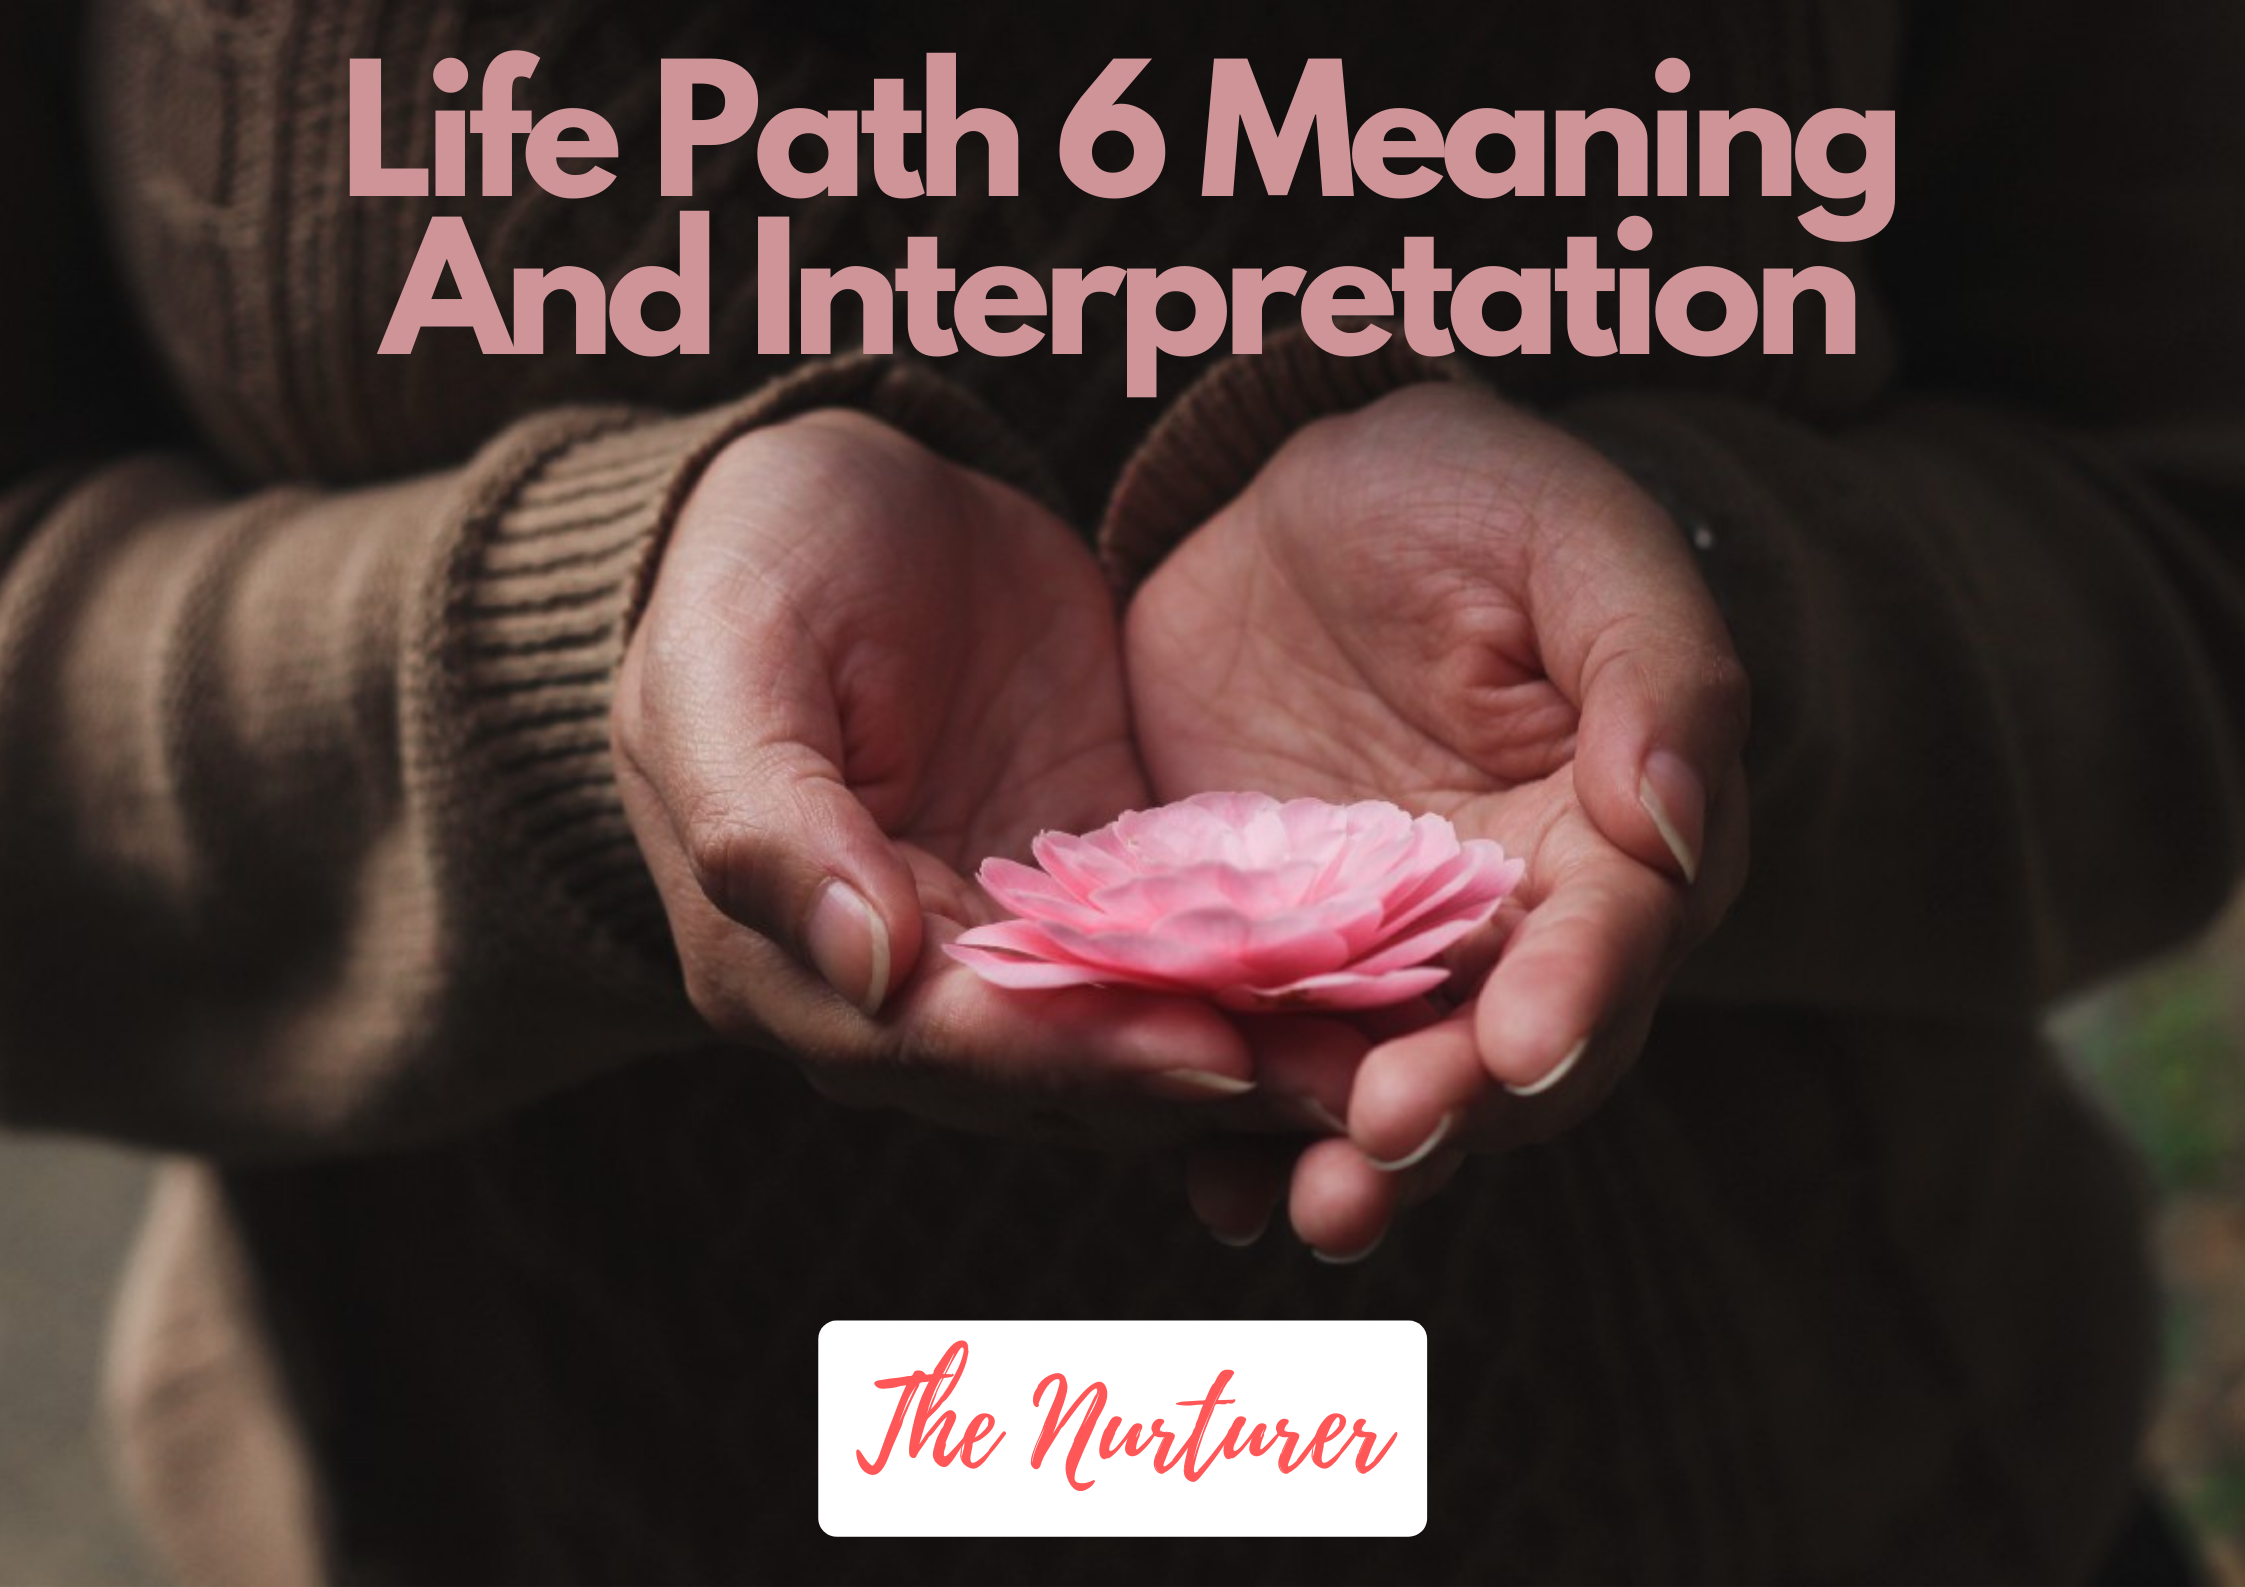 A woman holding a pink flower with words Life Path 6 Meaning And Interpretation The Nurturer